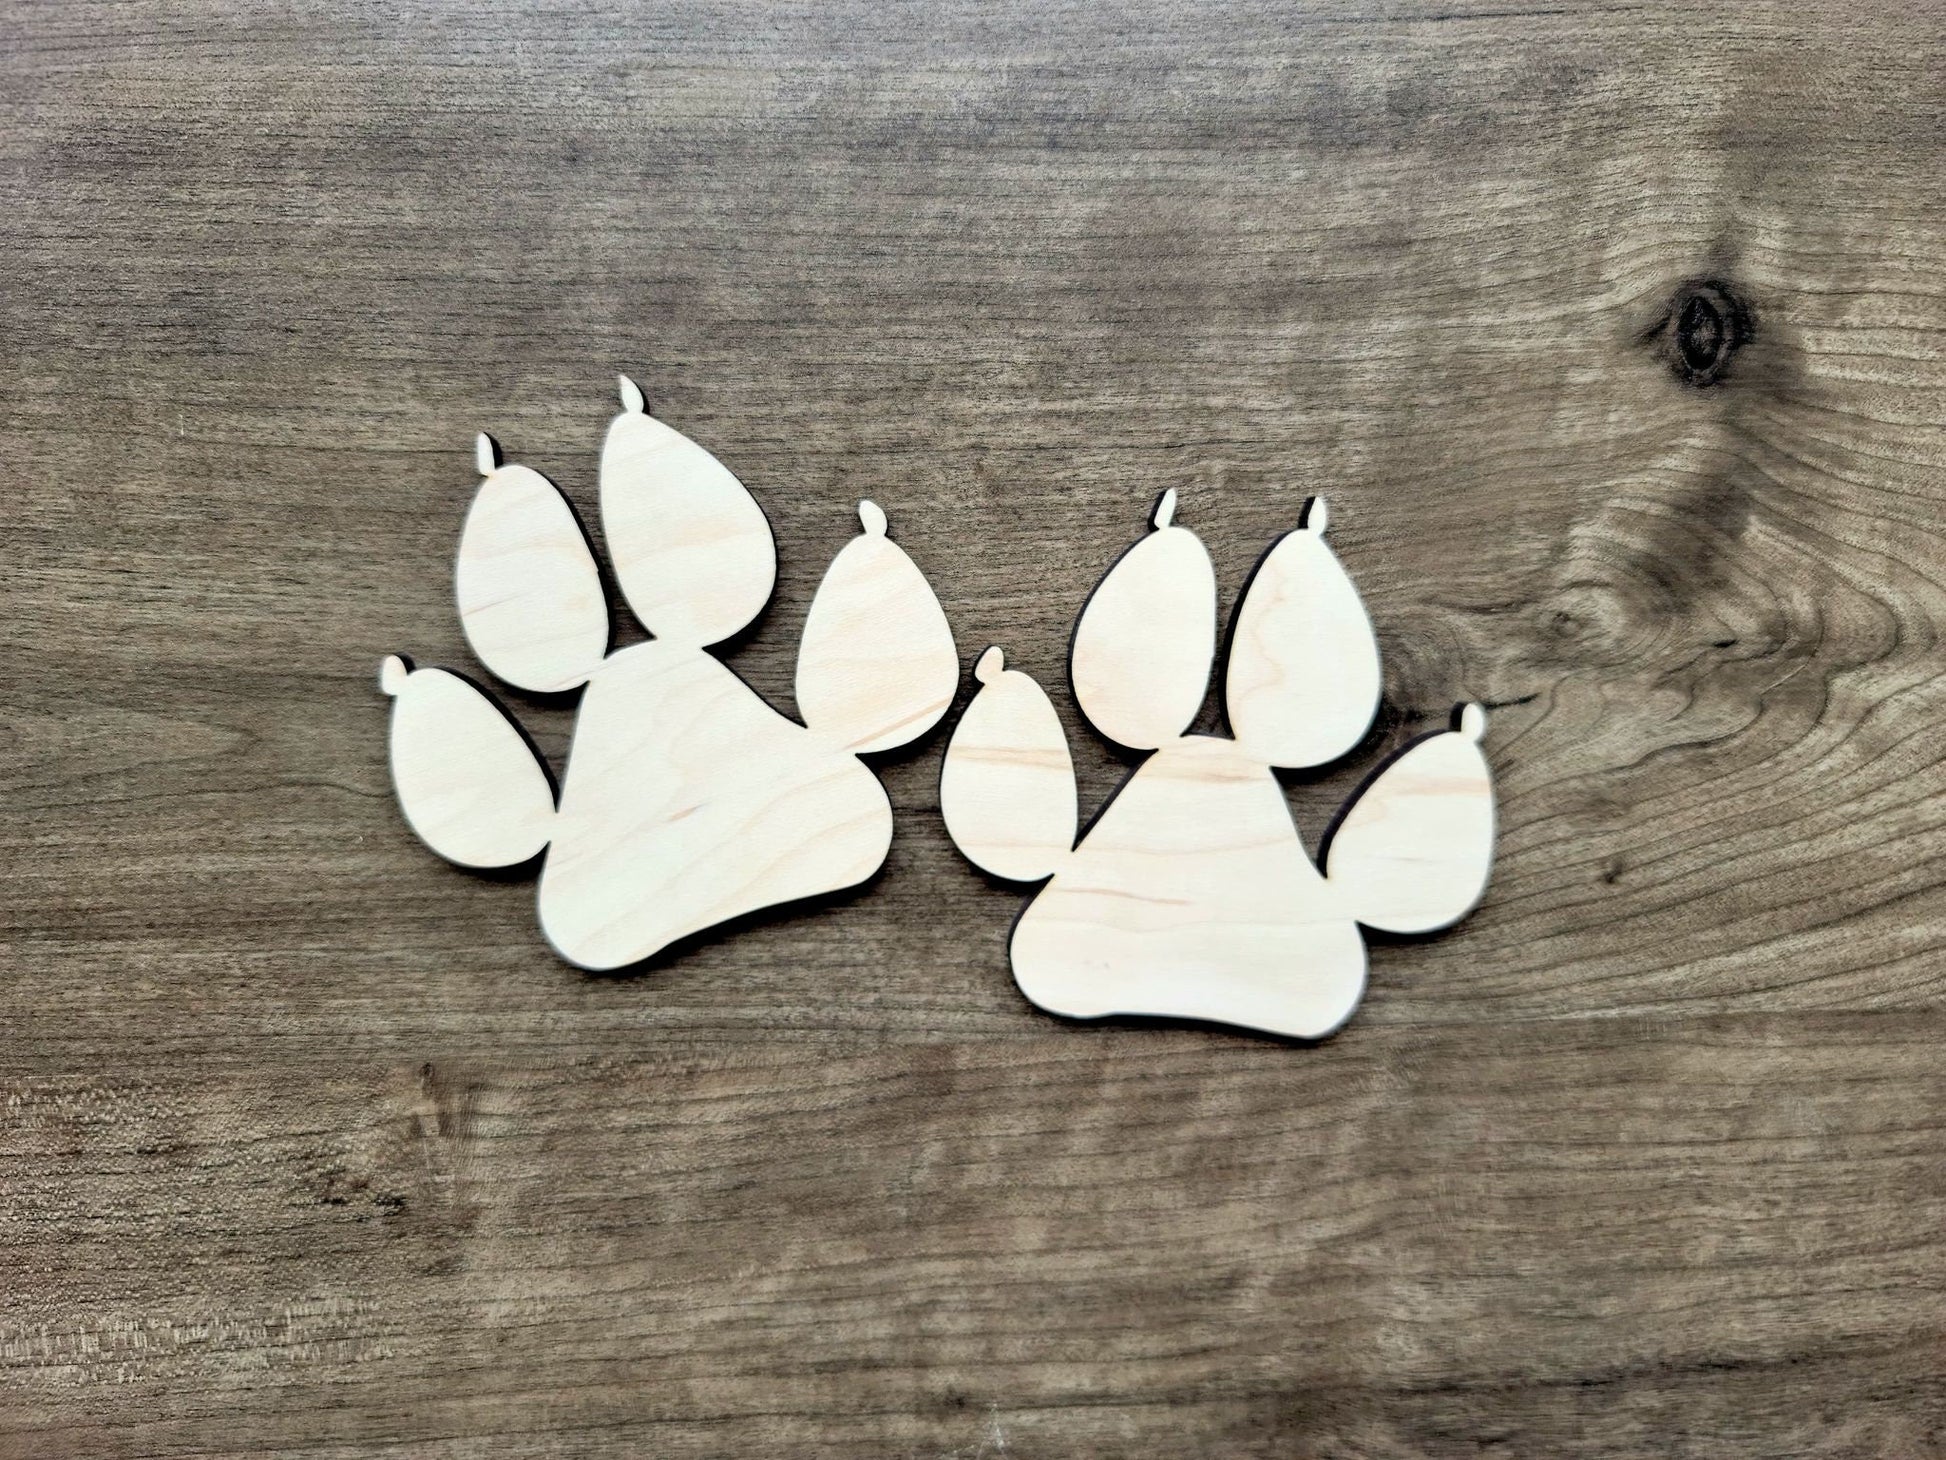 Paw Prints Wood Shape, Set of 2 Paw print Shape, Wood Dog Paw Blank, DIY Wood Blanks, Shapes for Crafts, Signs, Cat paw print, raw wood